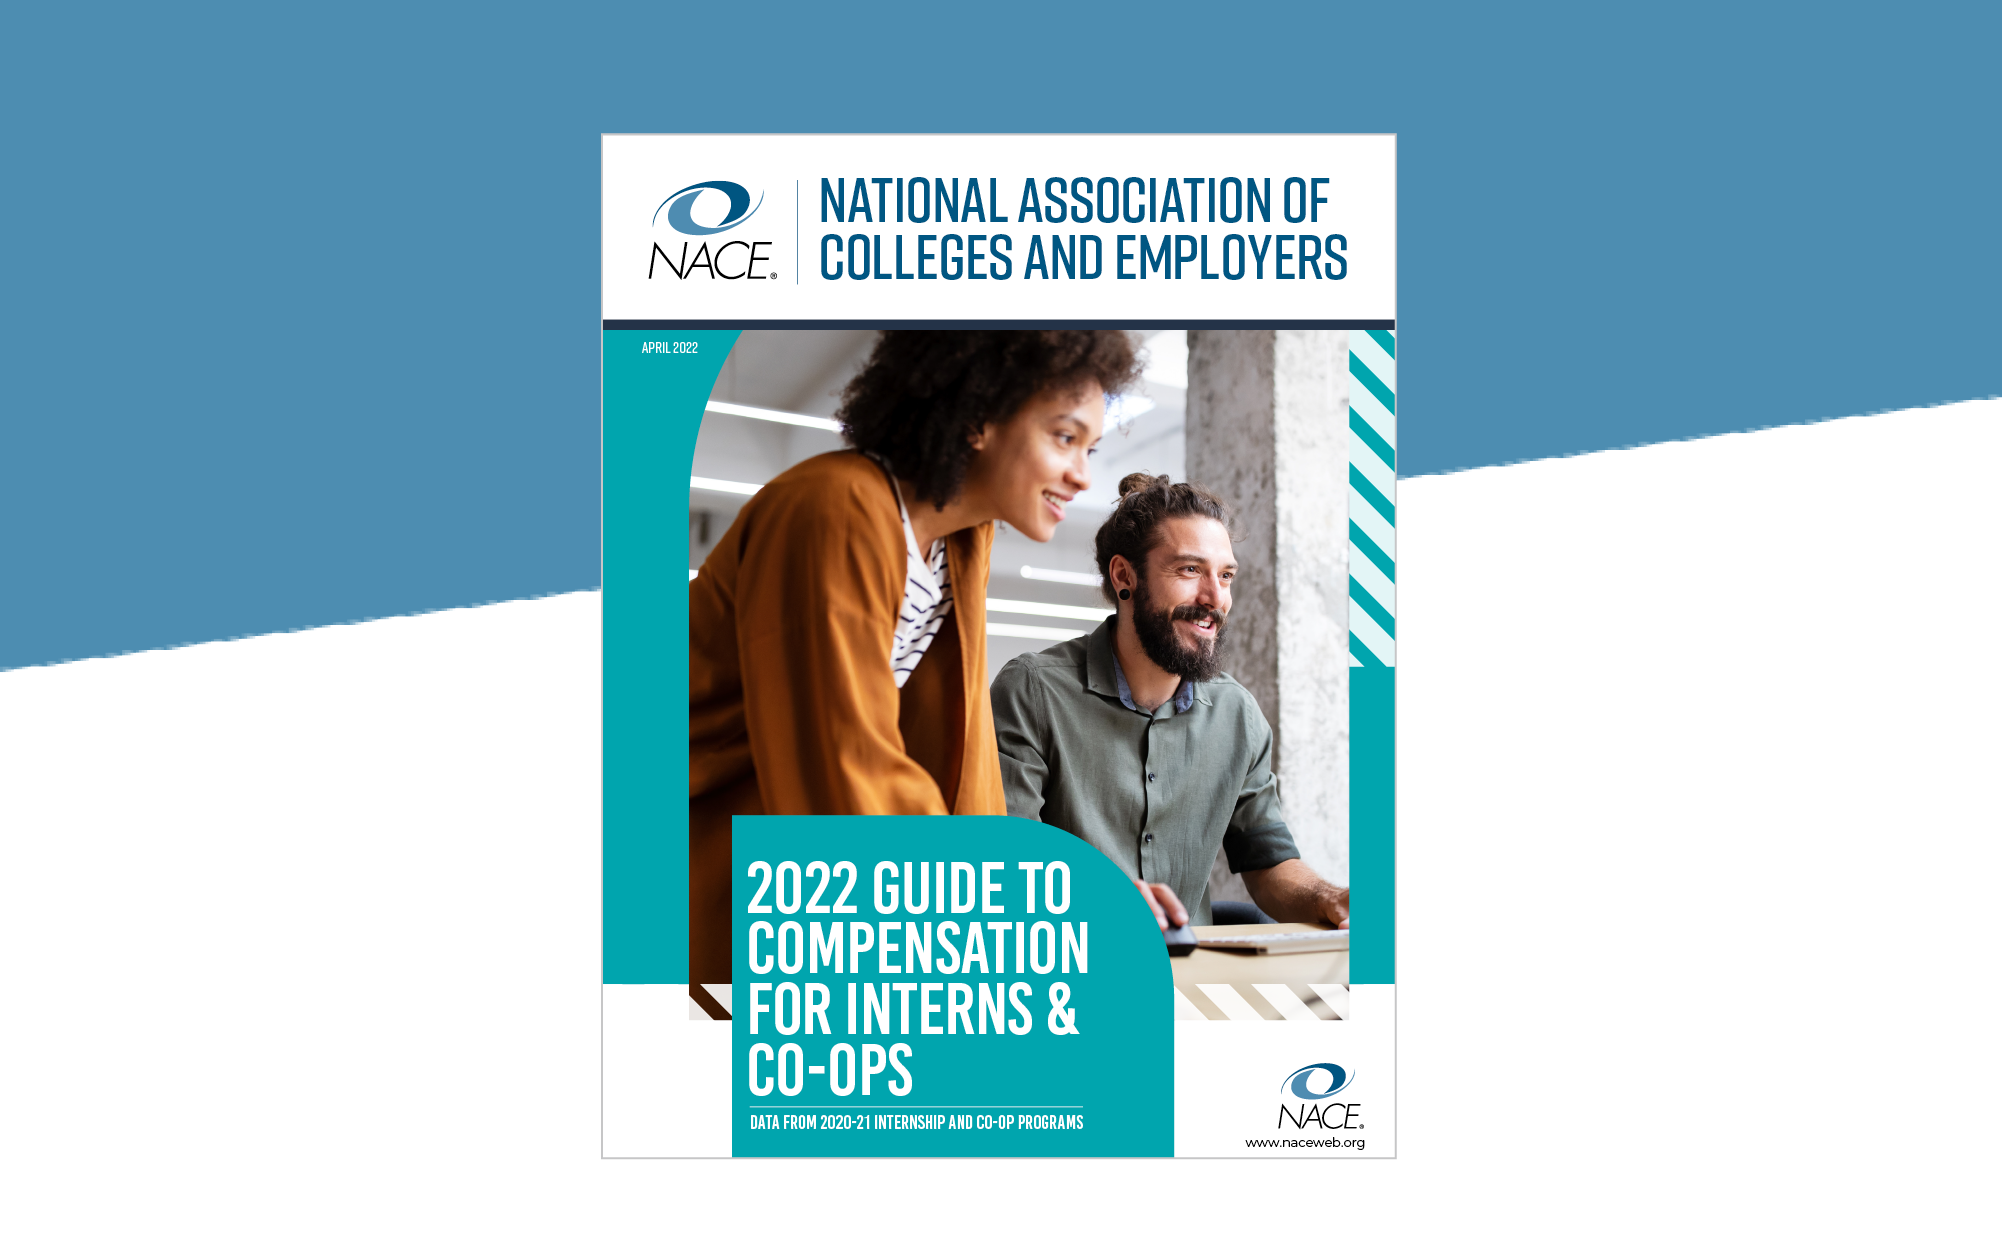 2022 Guide to Compensation for Interns & Co-Ops